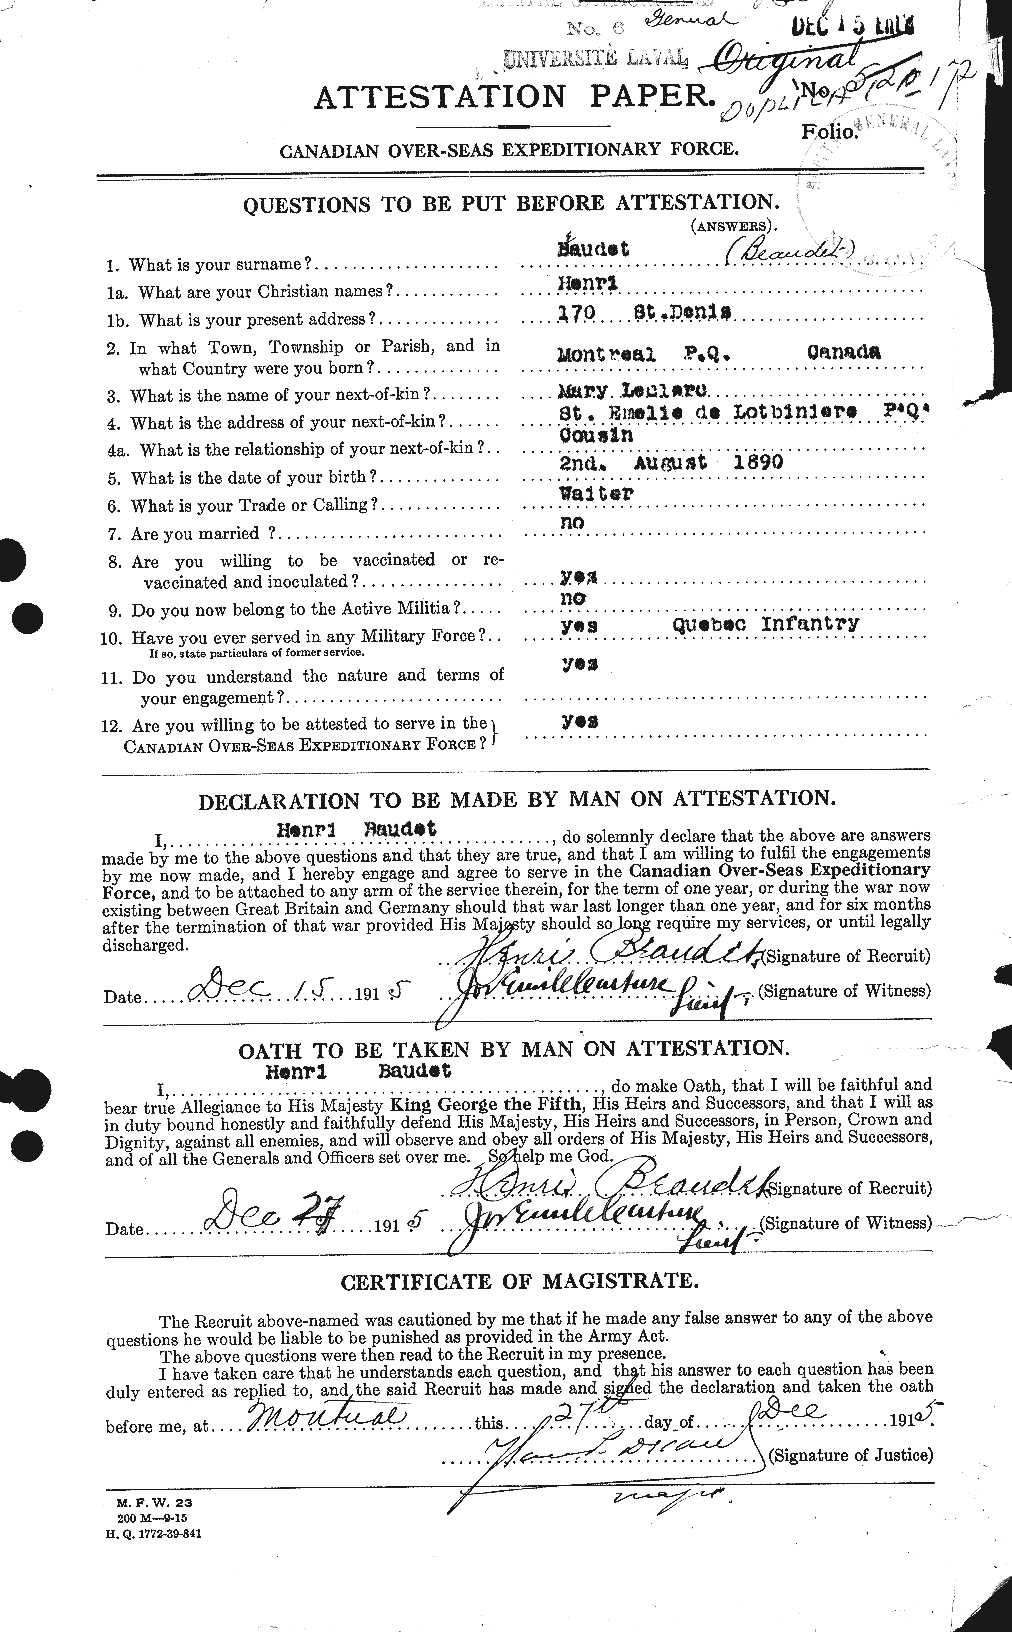 Personnel Records of the First World War - CEF 231113a